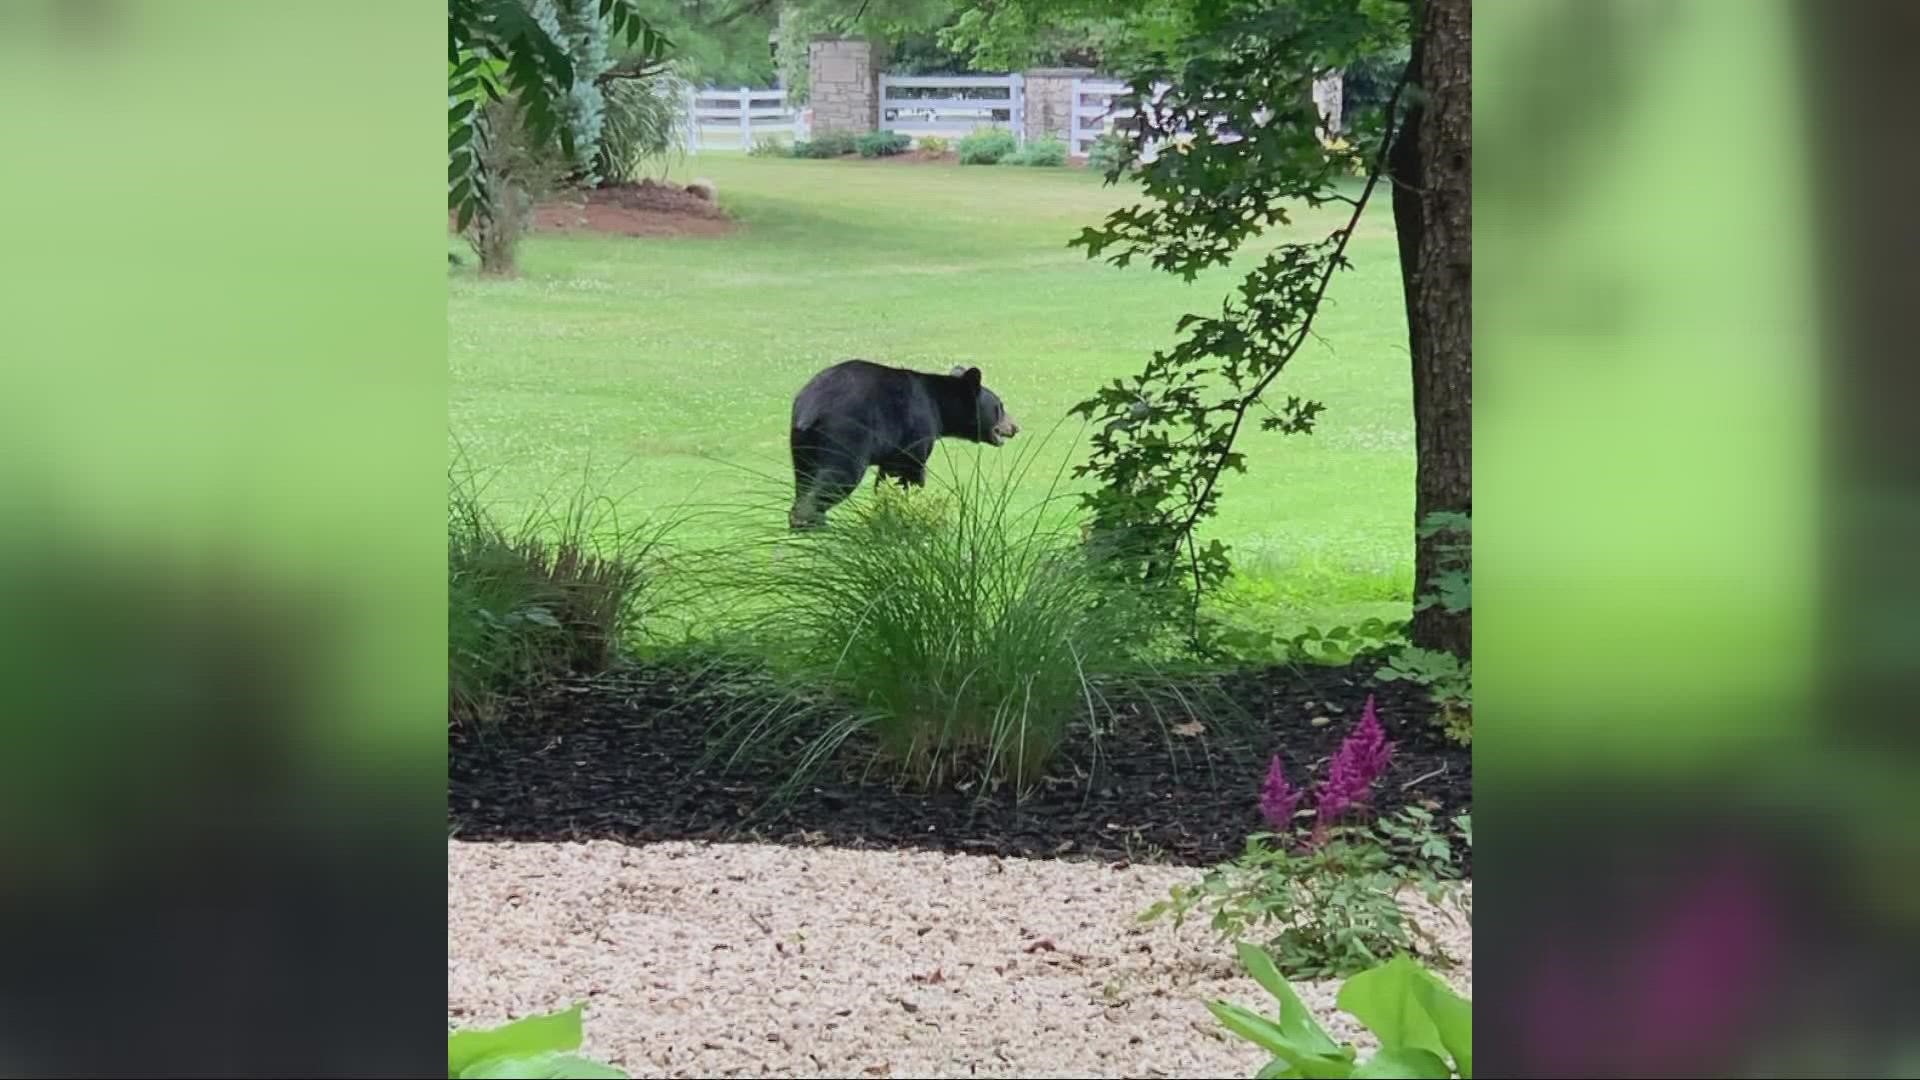 'Please remember to not feed the bear or approach it,' Norton Police warn on Facebook.